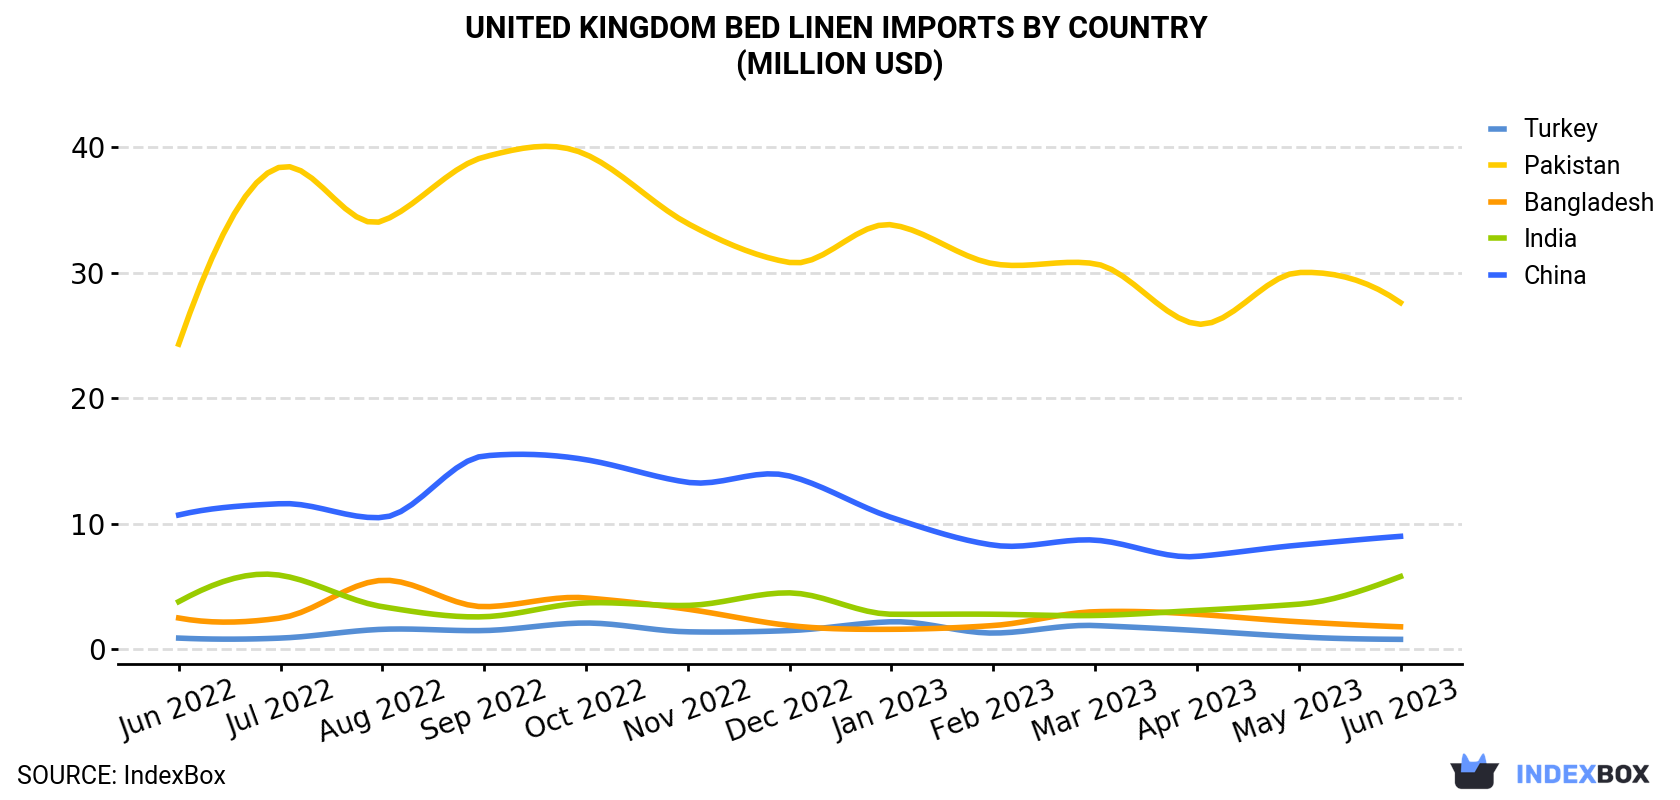 United Kingdom Bed Linen Imports By Country (Million USD)